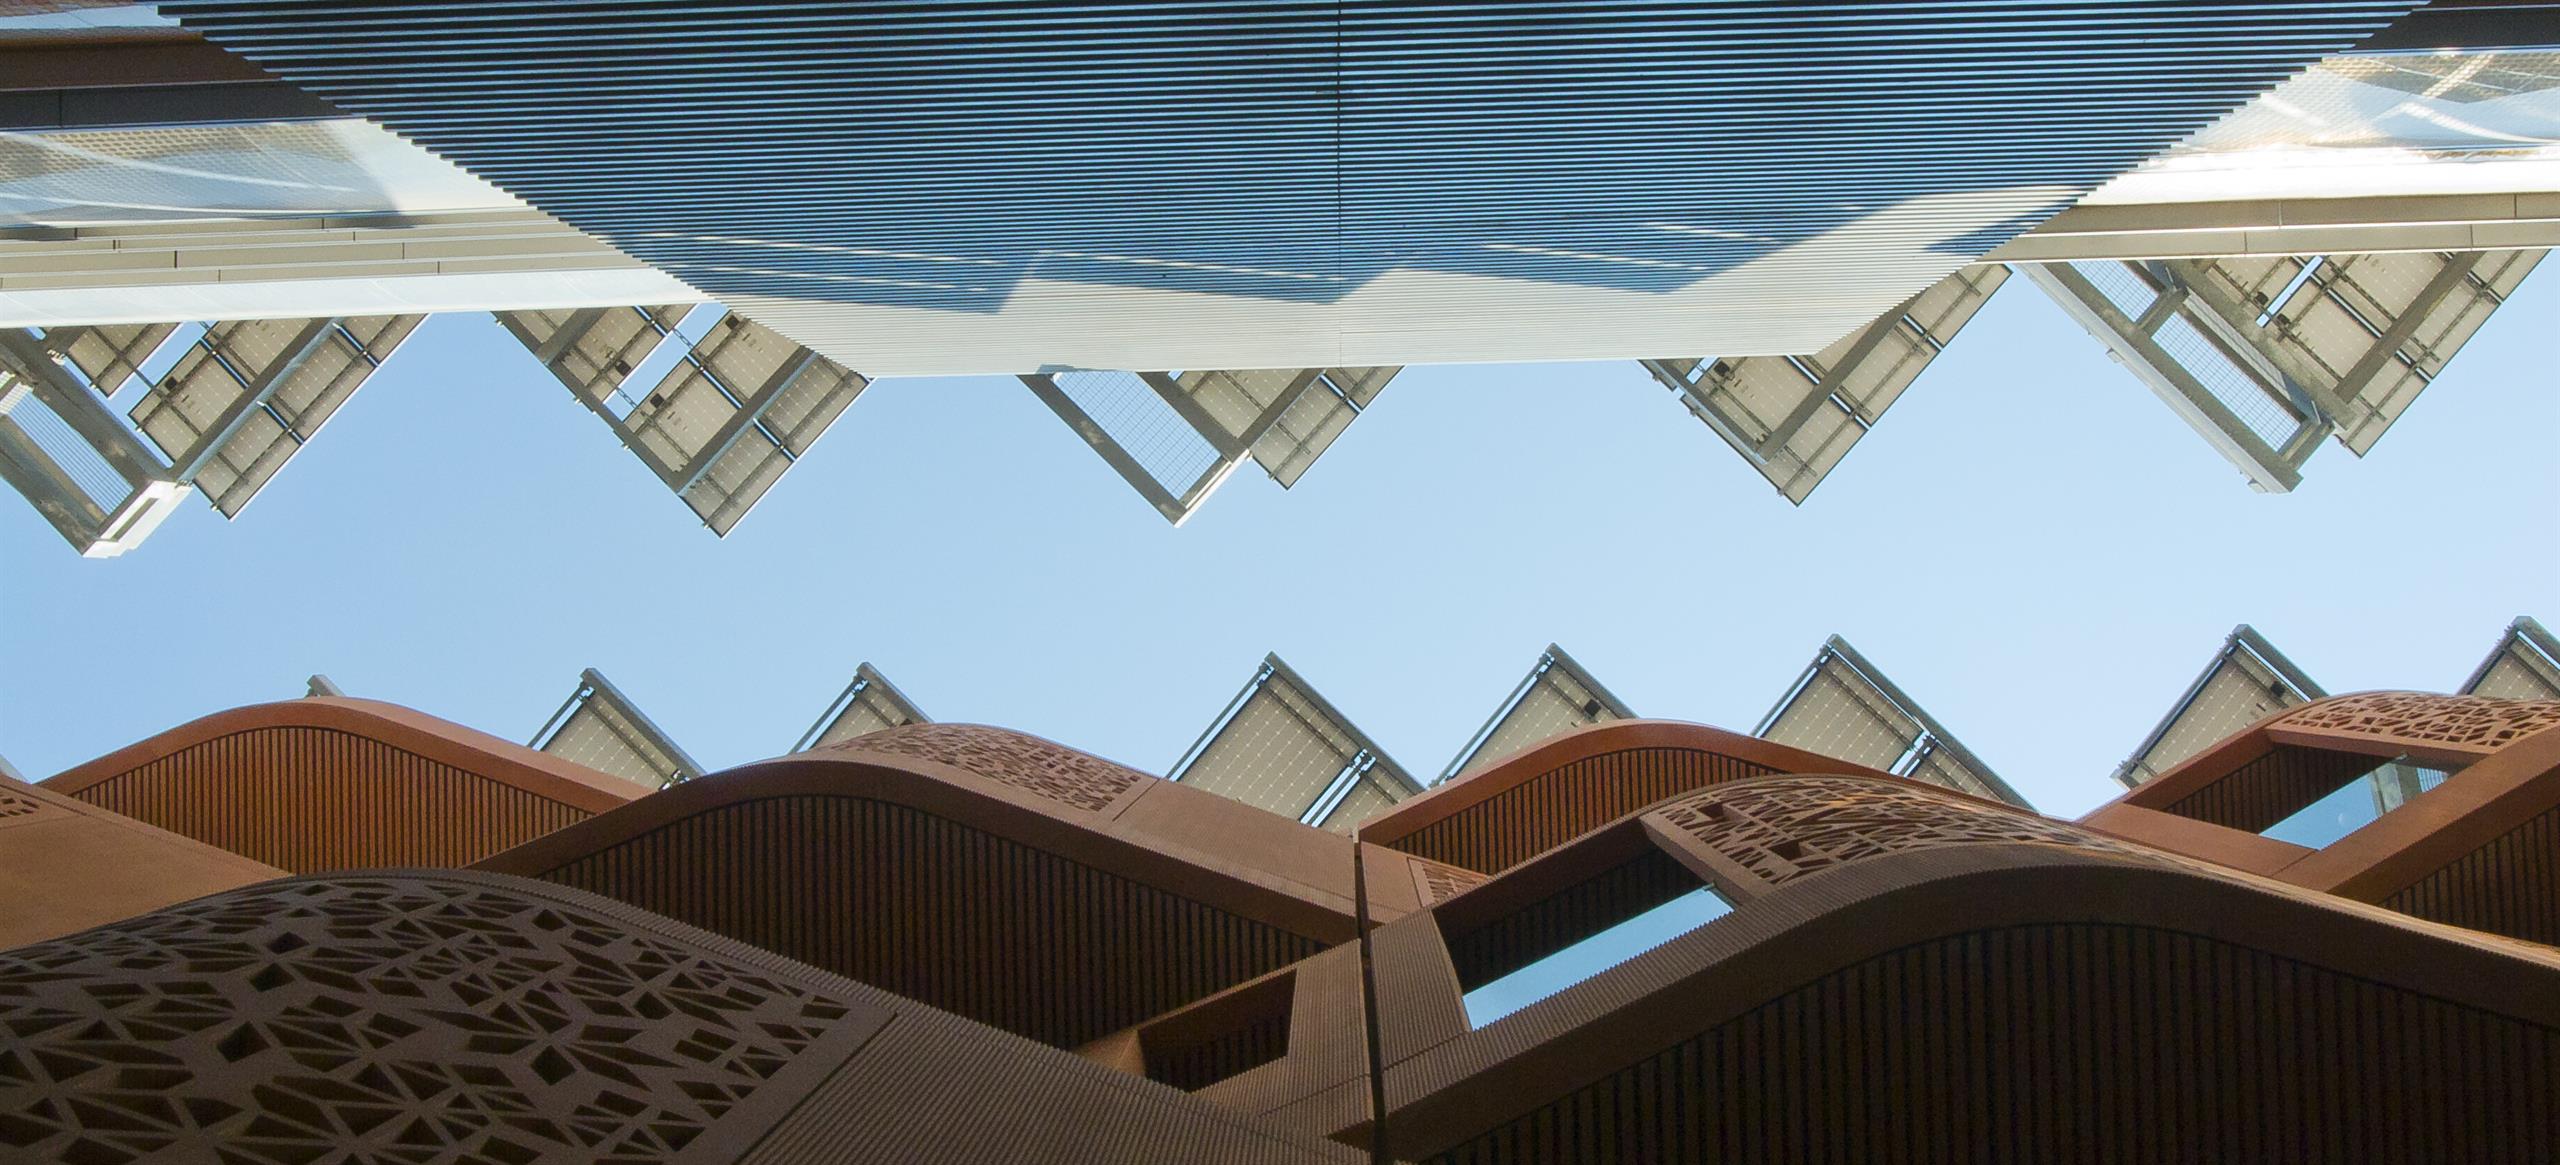 Looking at the sky from Masdar City